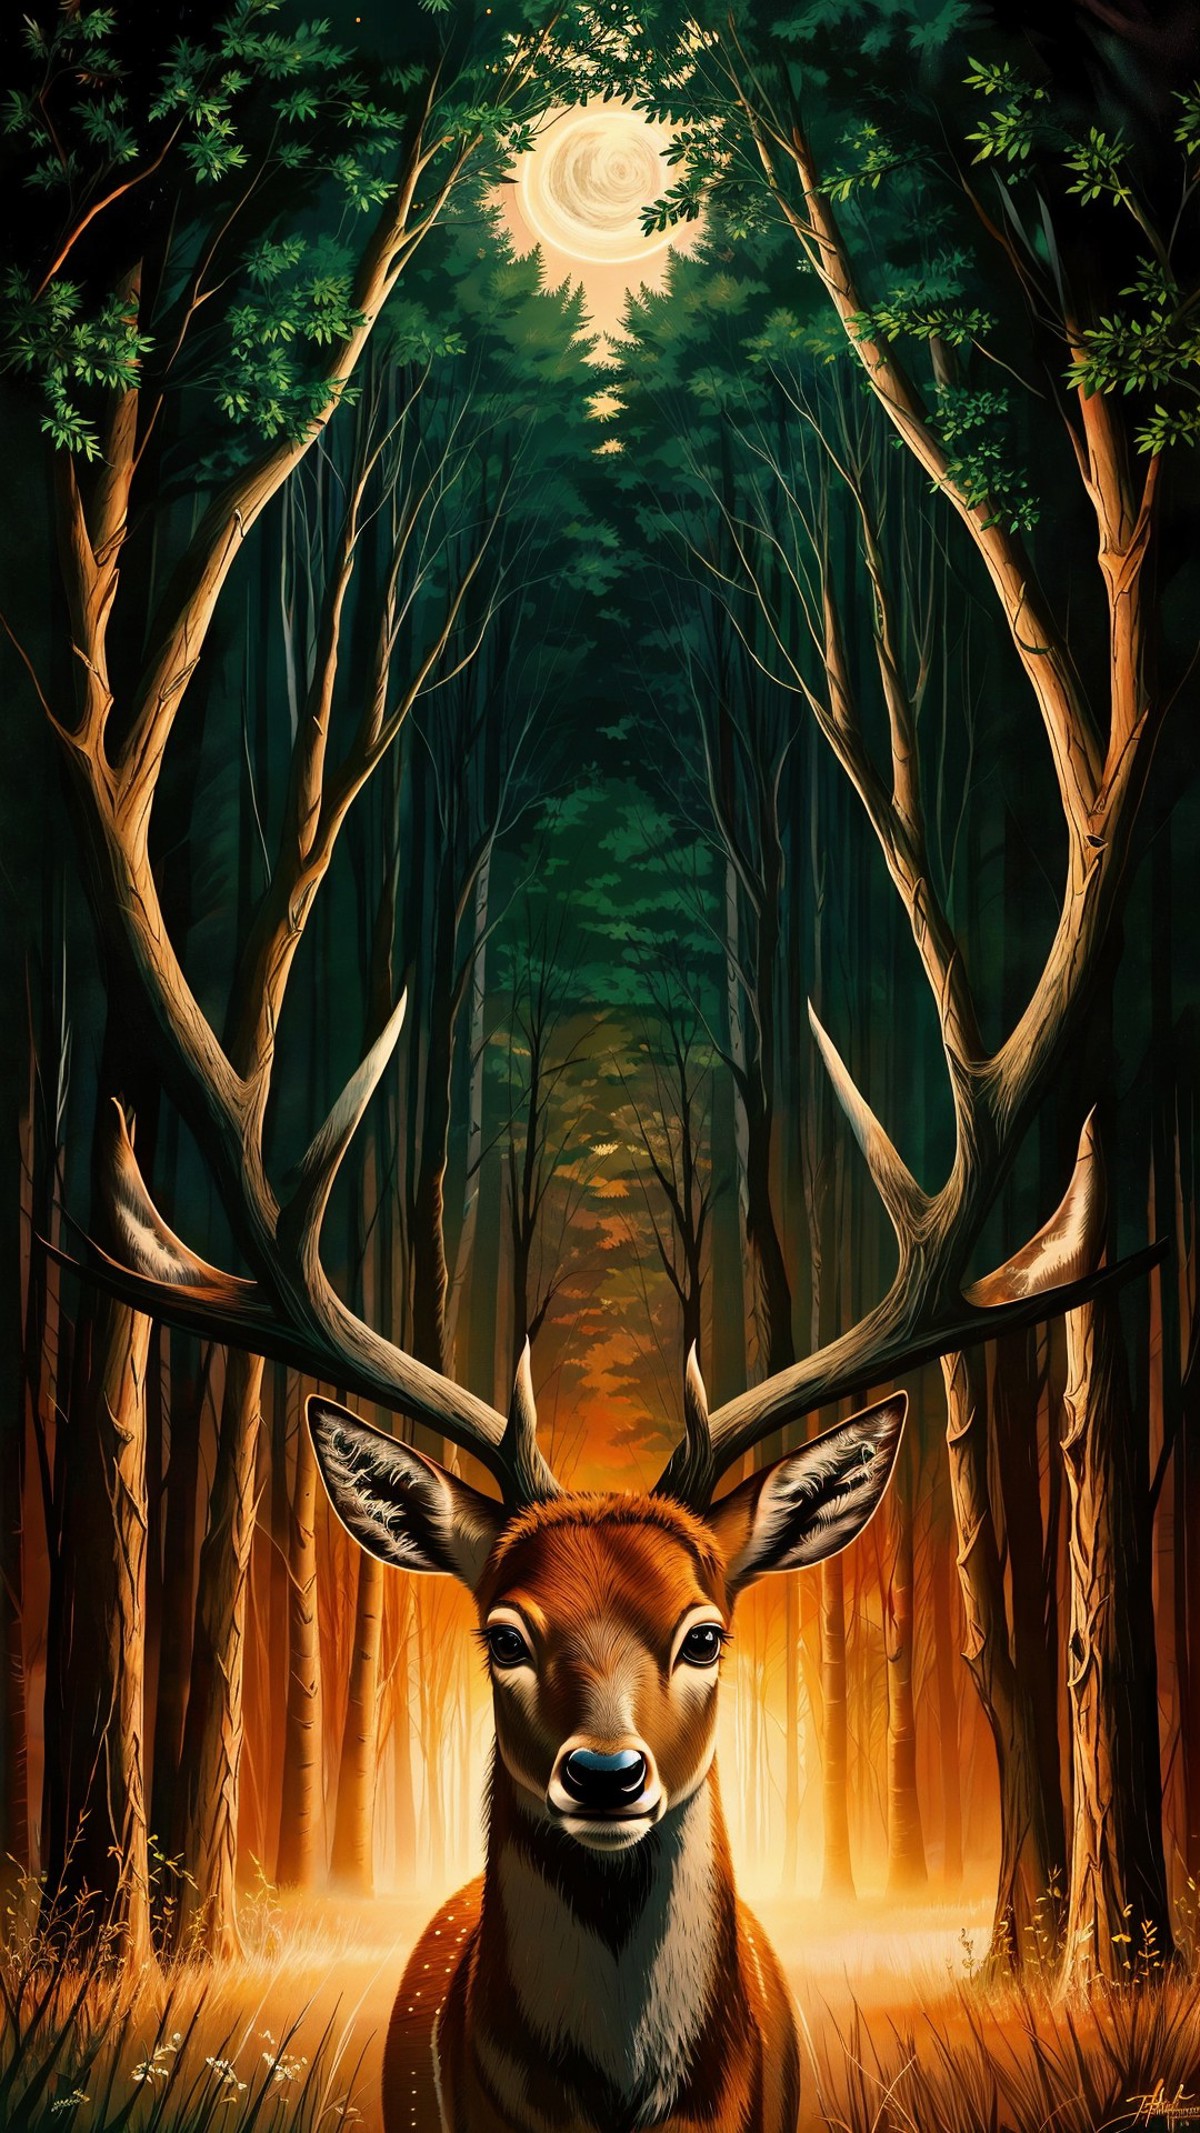 A deer standing in a forest next to trees.